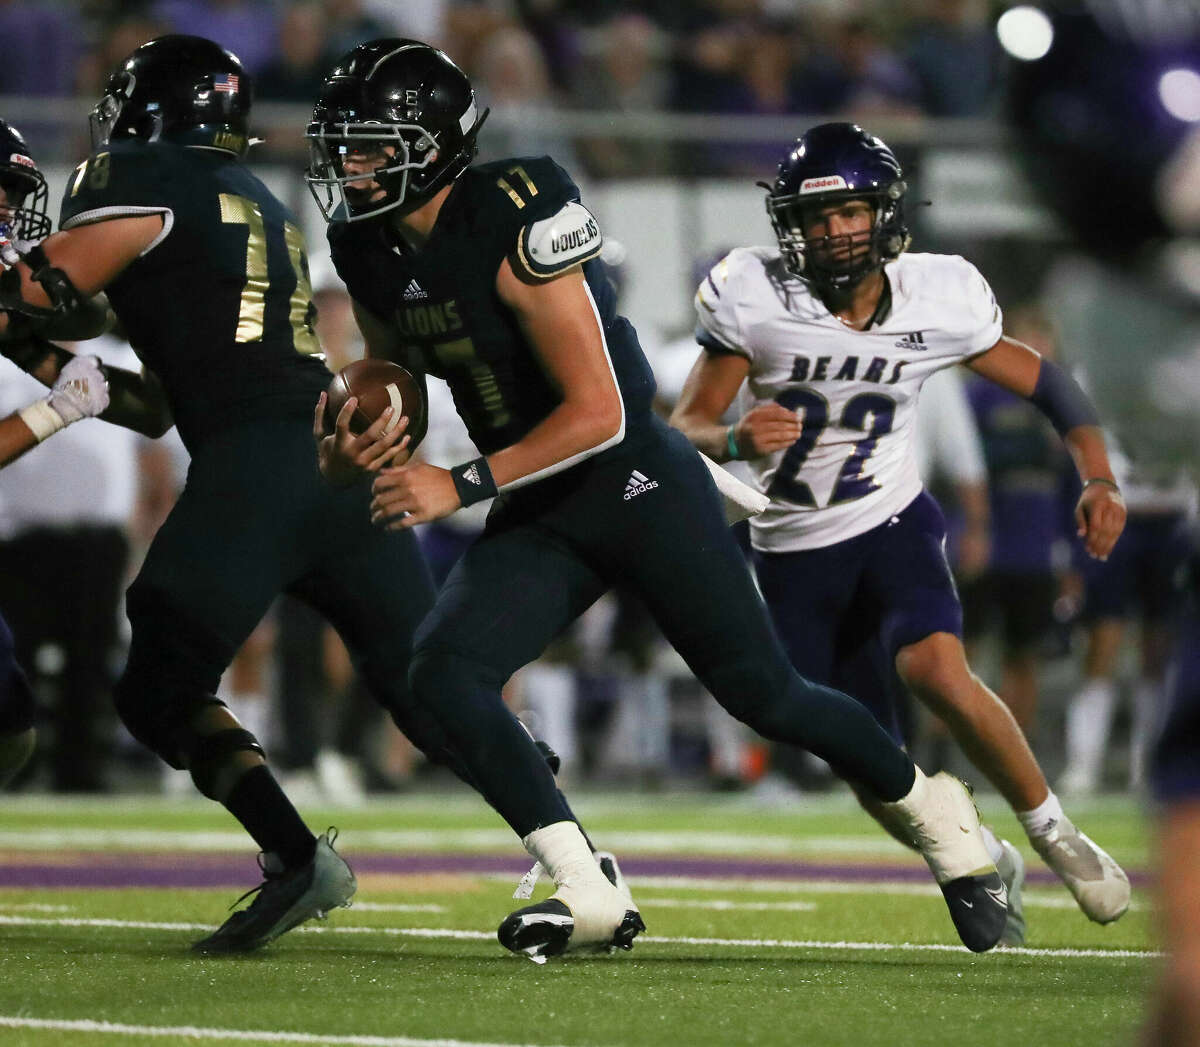 Lake Creek quarterback Cade Tessier (17) runs for a 10-yard touchdown in the second quarter of a District 10-5A (Div. II) high school football game at Montgomery ISD Stadium, Friday, Sept. 30, 2022, in Montgomery.